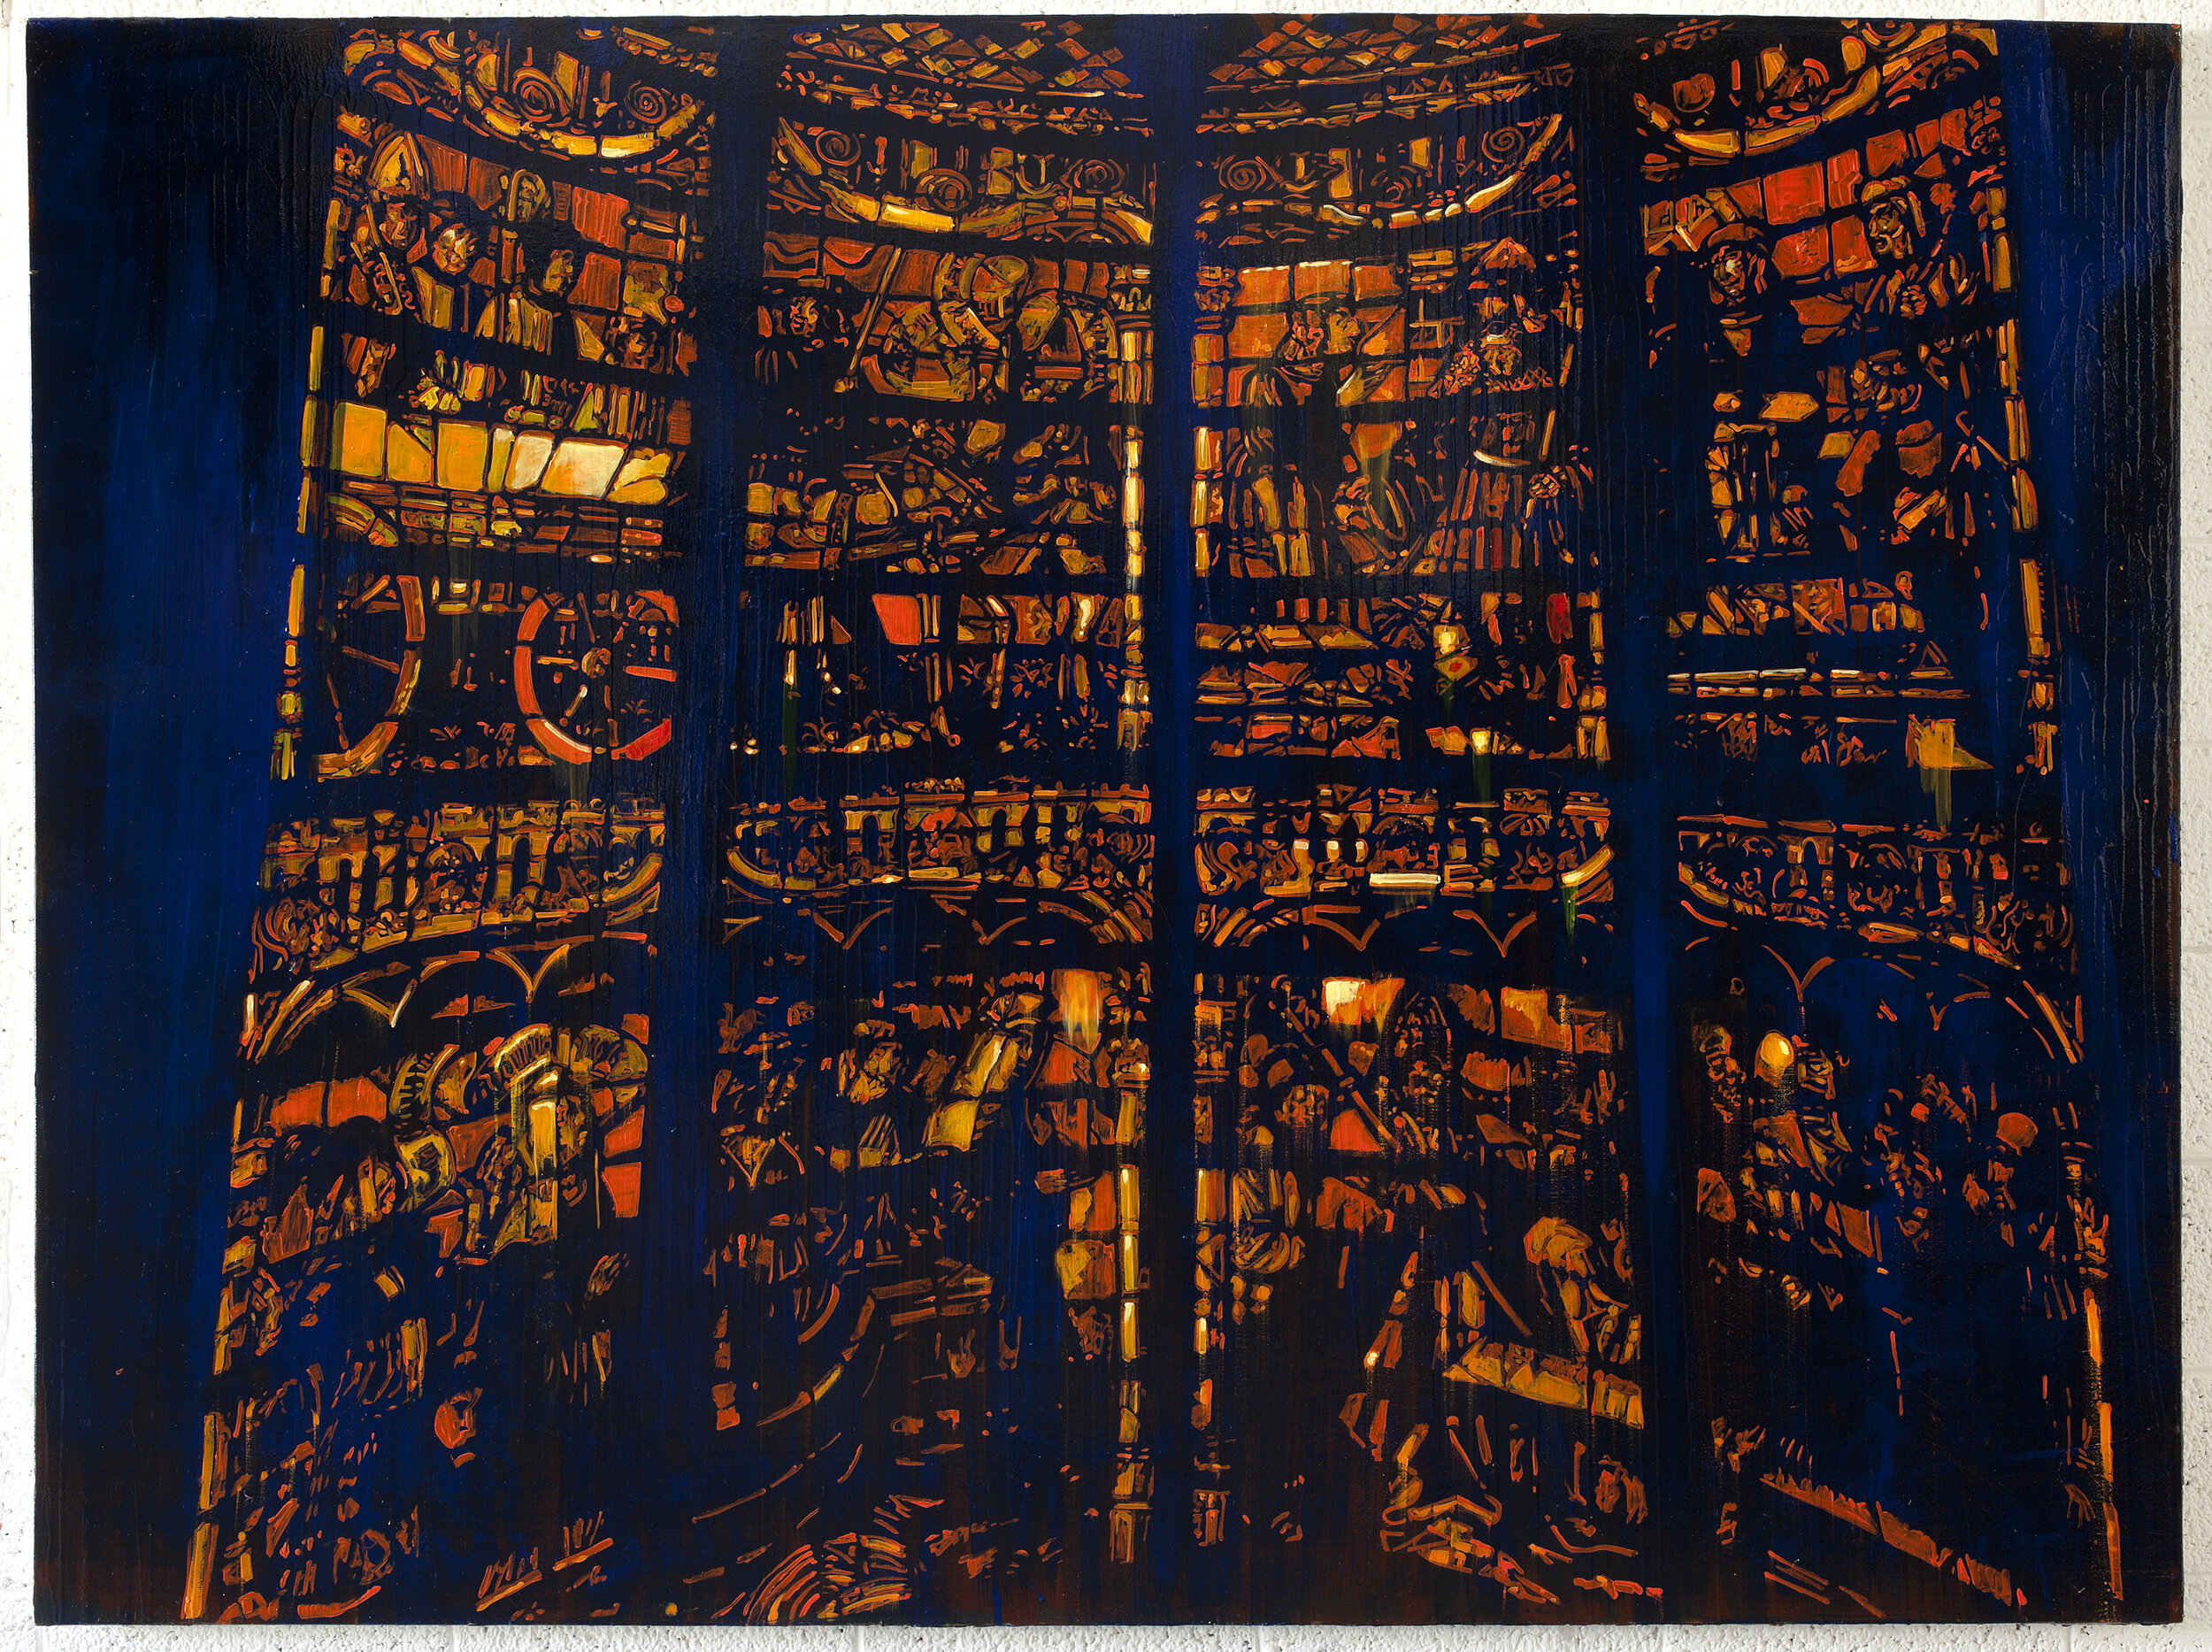 Stained Glass (2012), oil on canvas, 160 x 215 cm